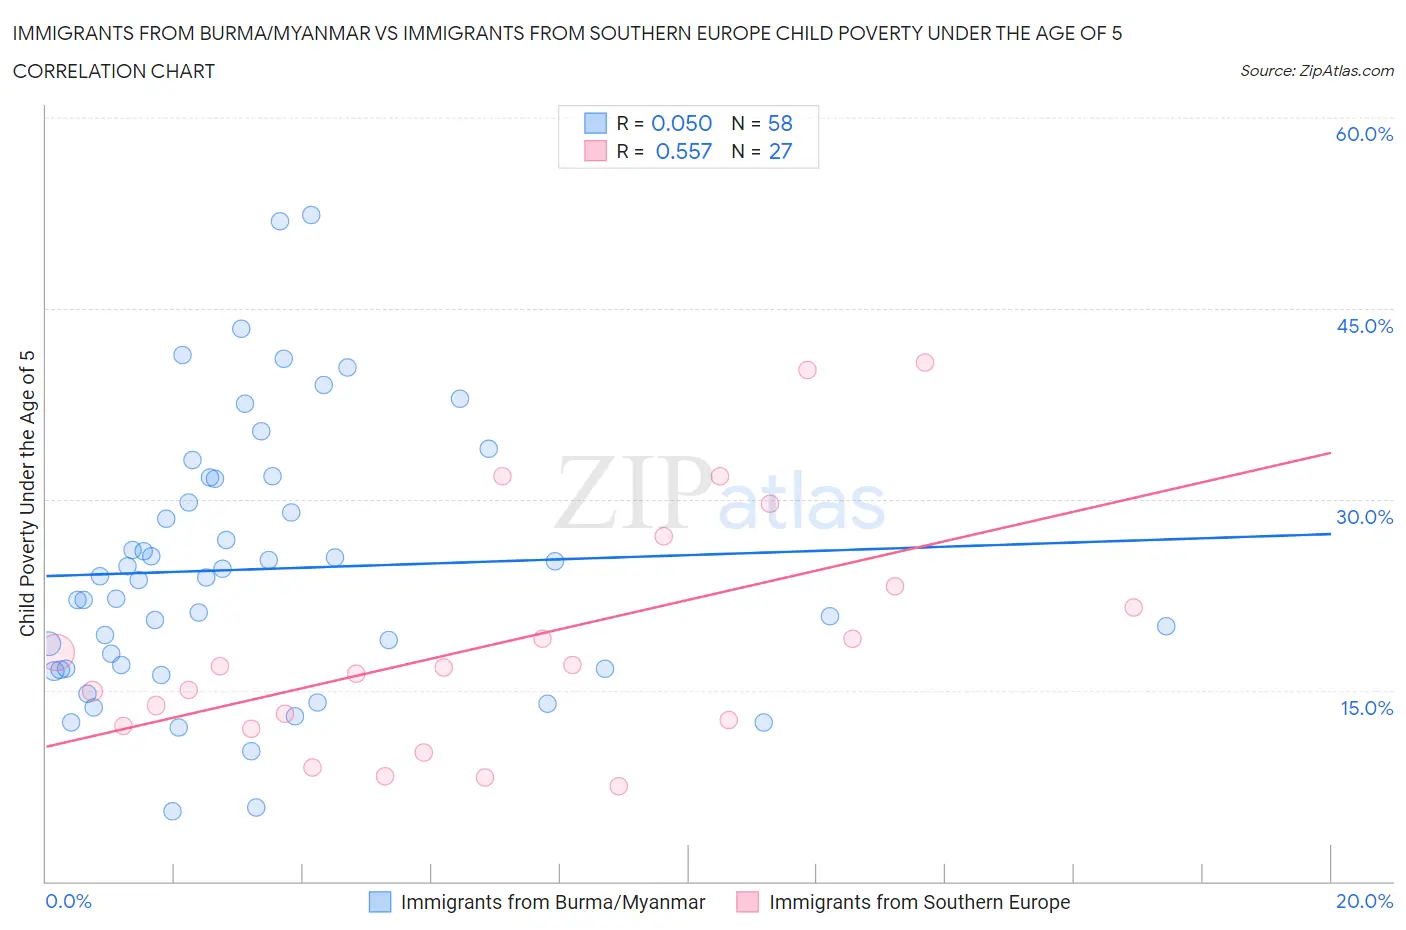 Immigrants from Burma/Myanmar vs Immigrants from Southern Europe Child Poverty Under the Age of 5